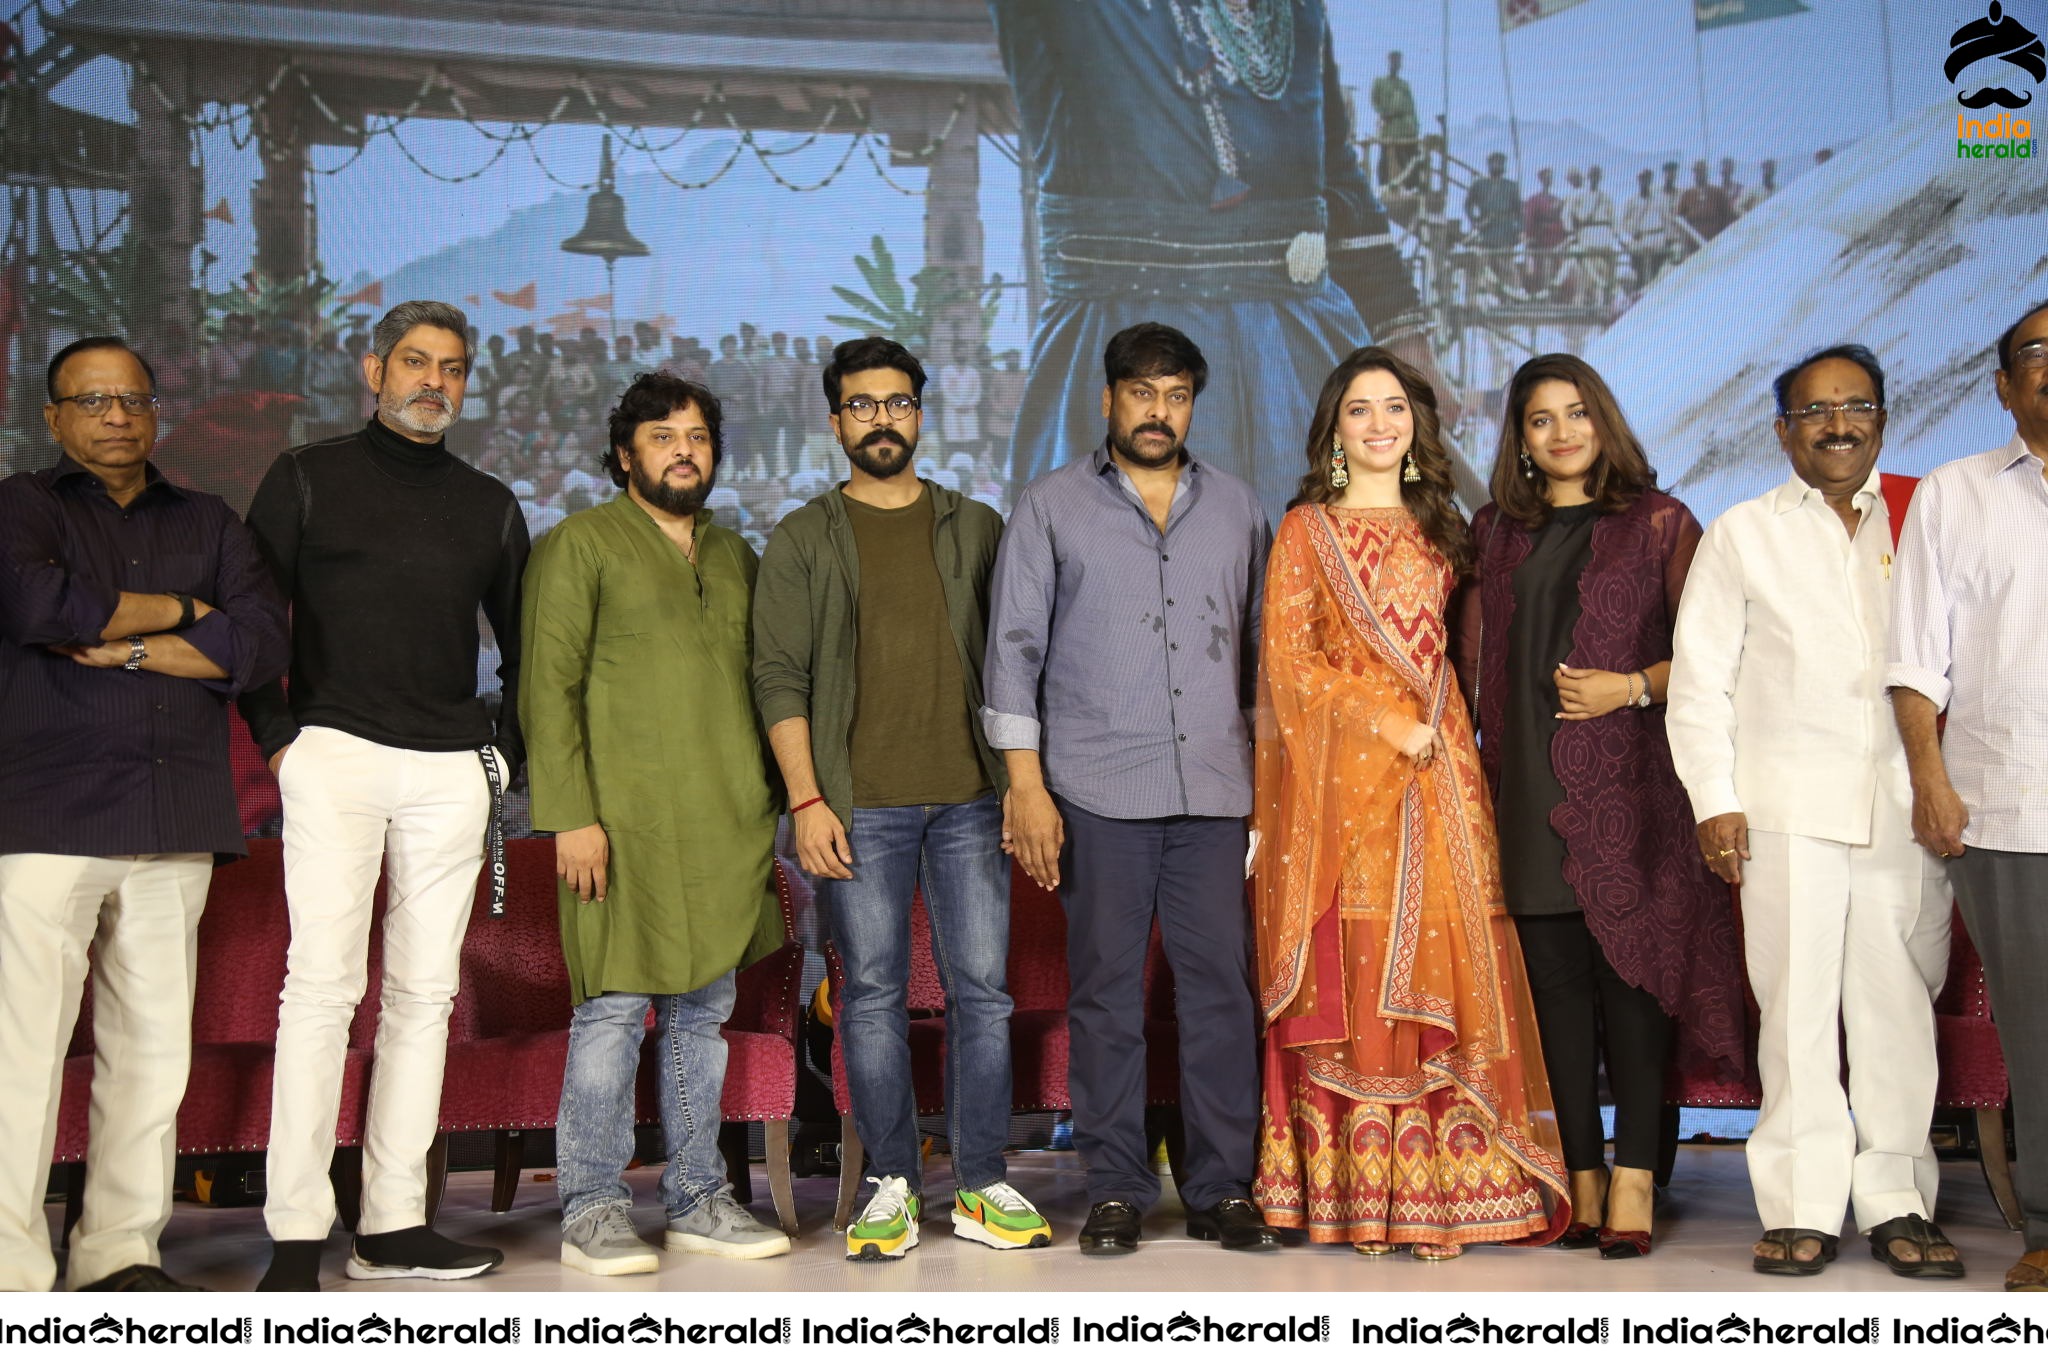 Chiranjeevi Tamanna and Ram Charan from the stage of Sye Raa Thank You Meet Set 5